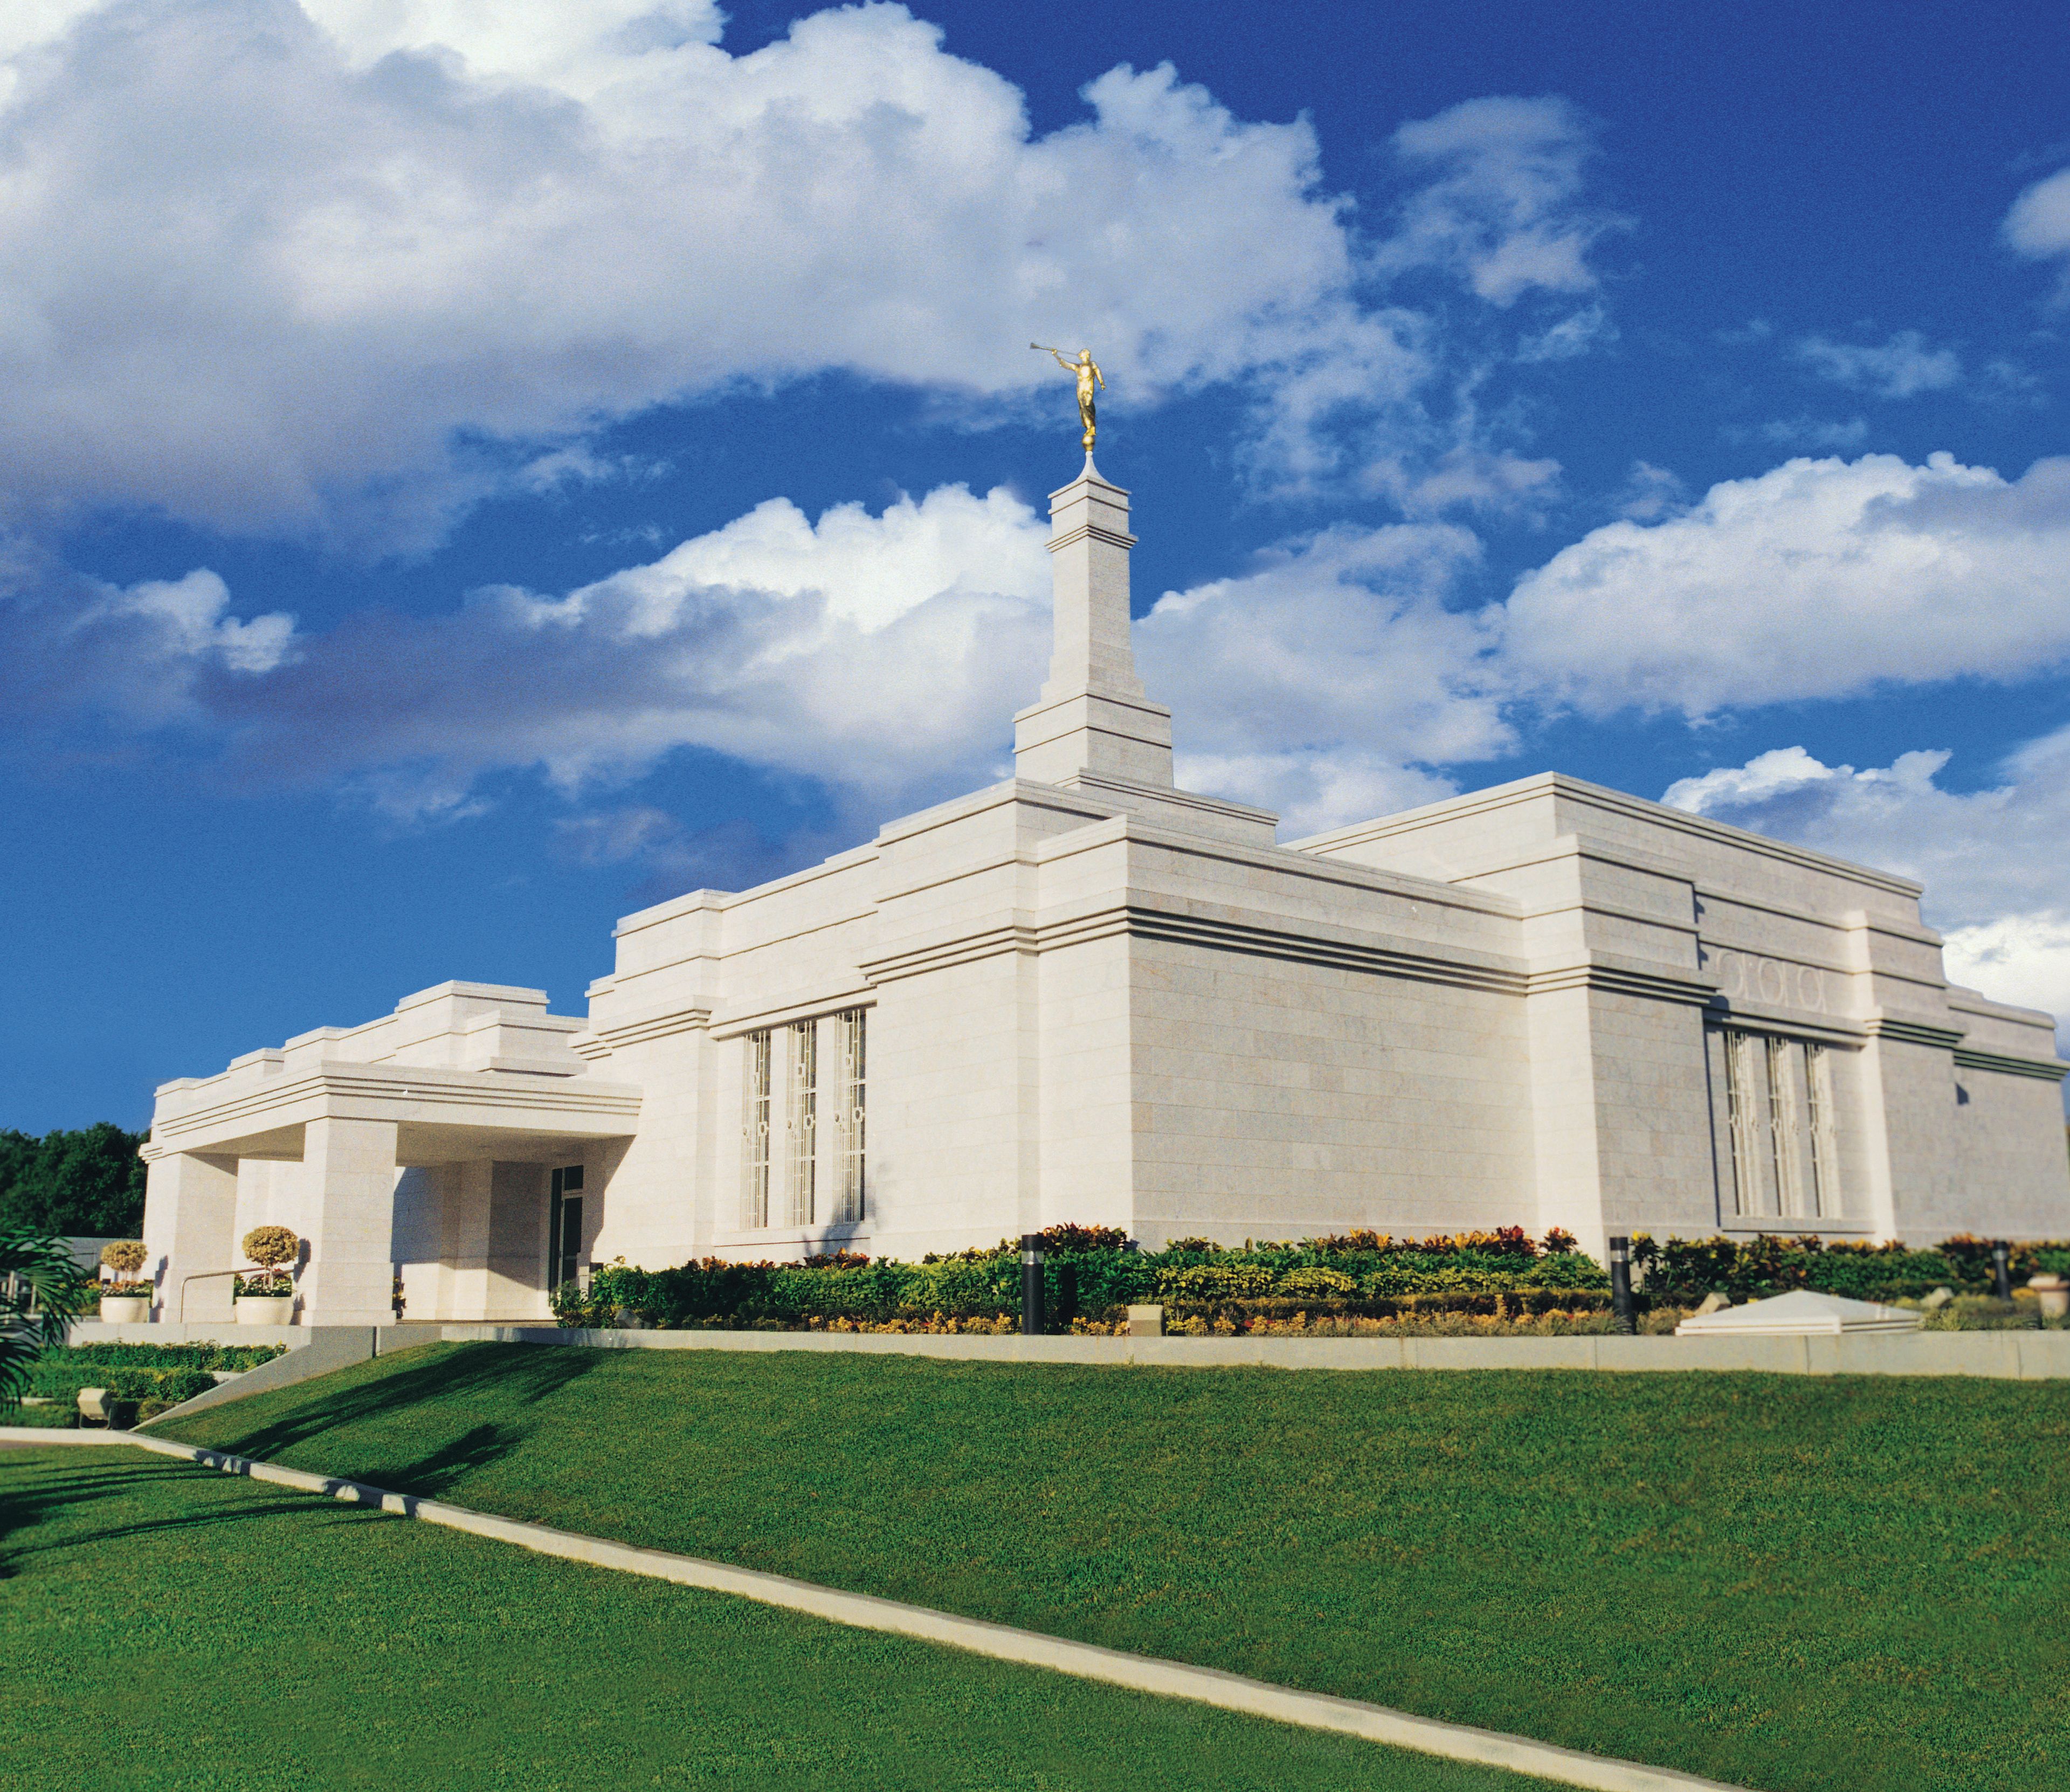 The Mérida Mexico Temple exterior on a partly cloudy day.